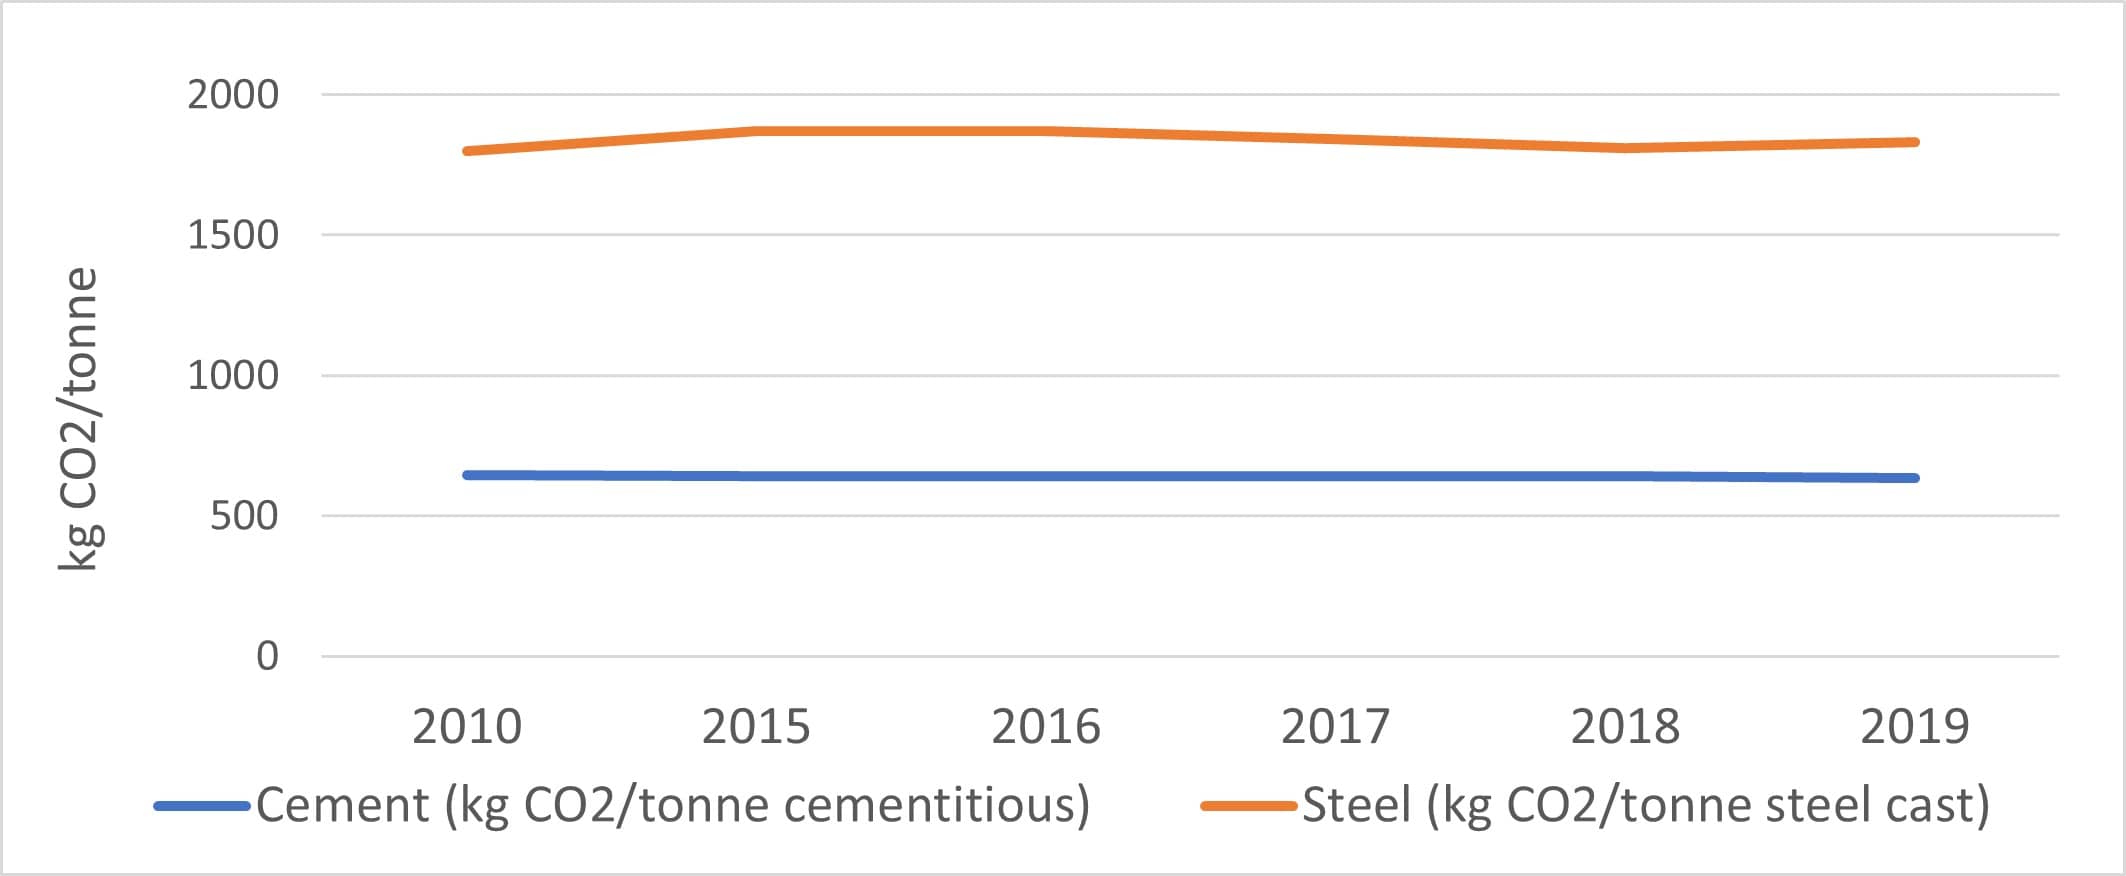 <strong>Figure 1.</strong> Carbon Intensity of cement and steel 2010-2019. <em>Sources: </em>GCCA (2021) and World Steel (2021).